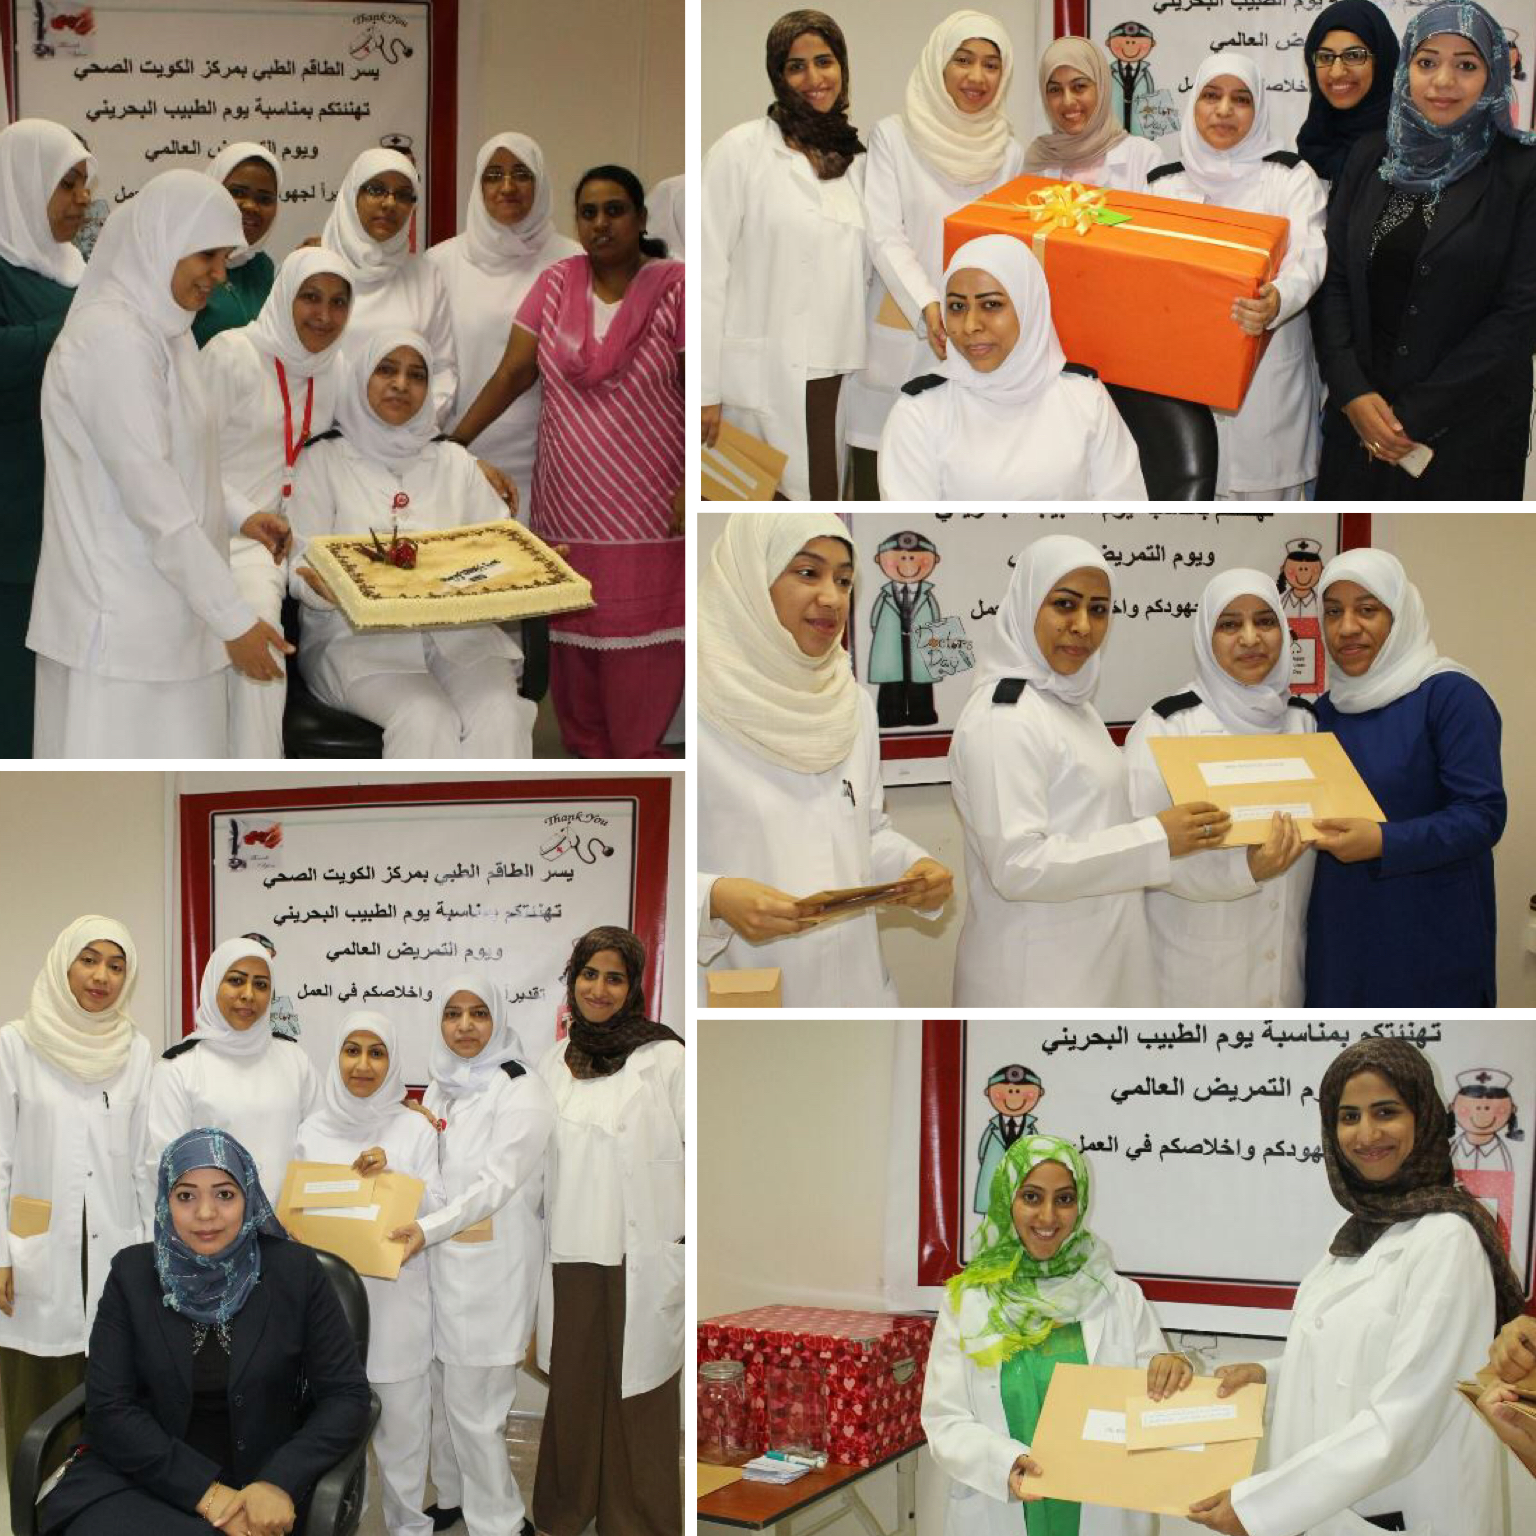 Kuwait health center organizes an event on the occasion of Bahraini physician’s Day and World Nursing Day 